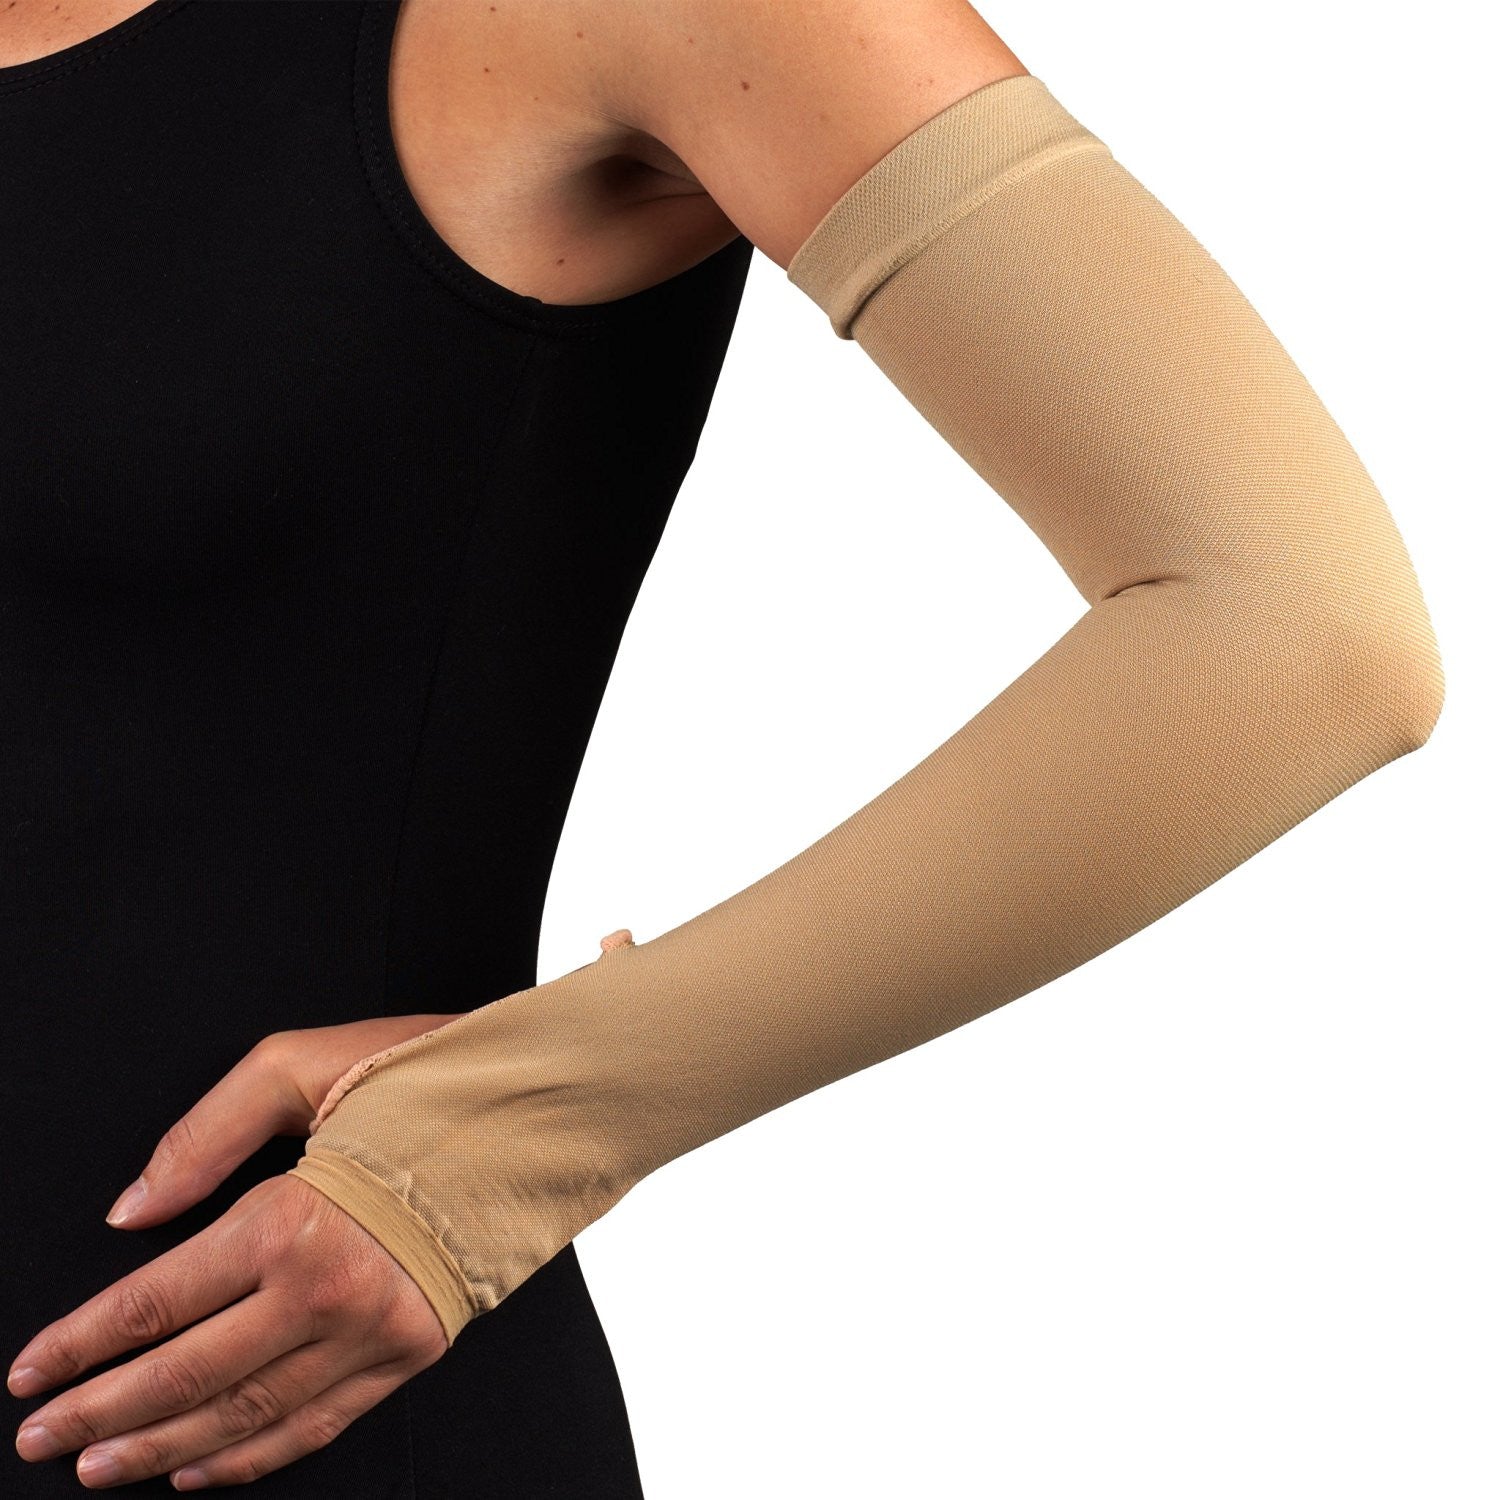 Lymphedema Arm Sleeve Lymphedema Arm Support Sleeve Swelling